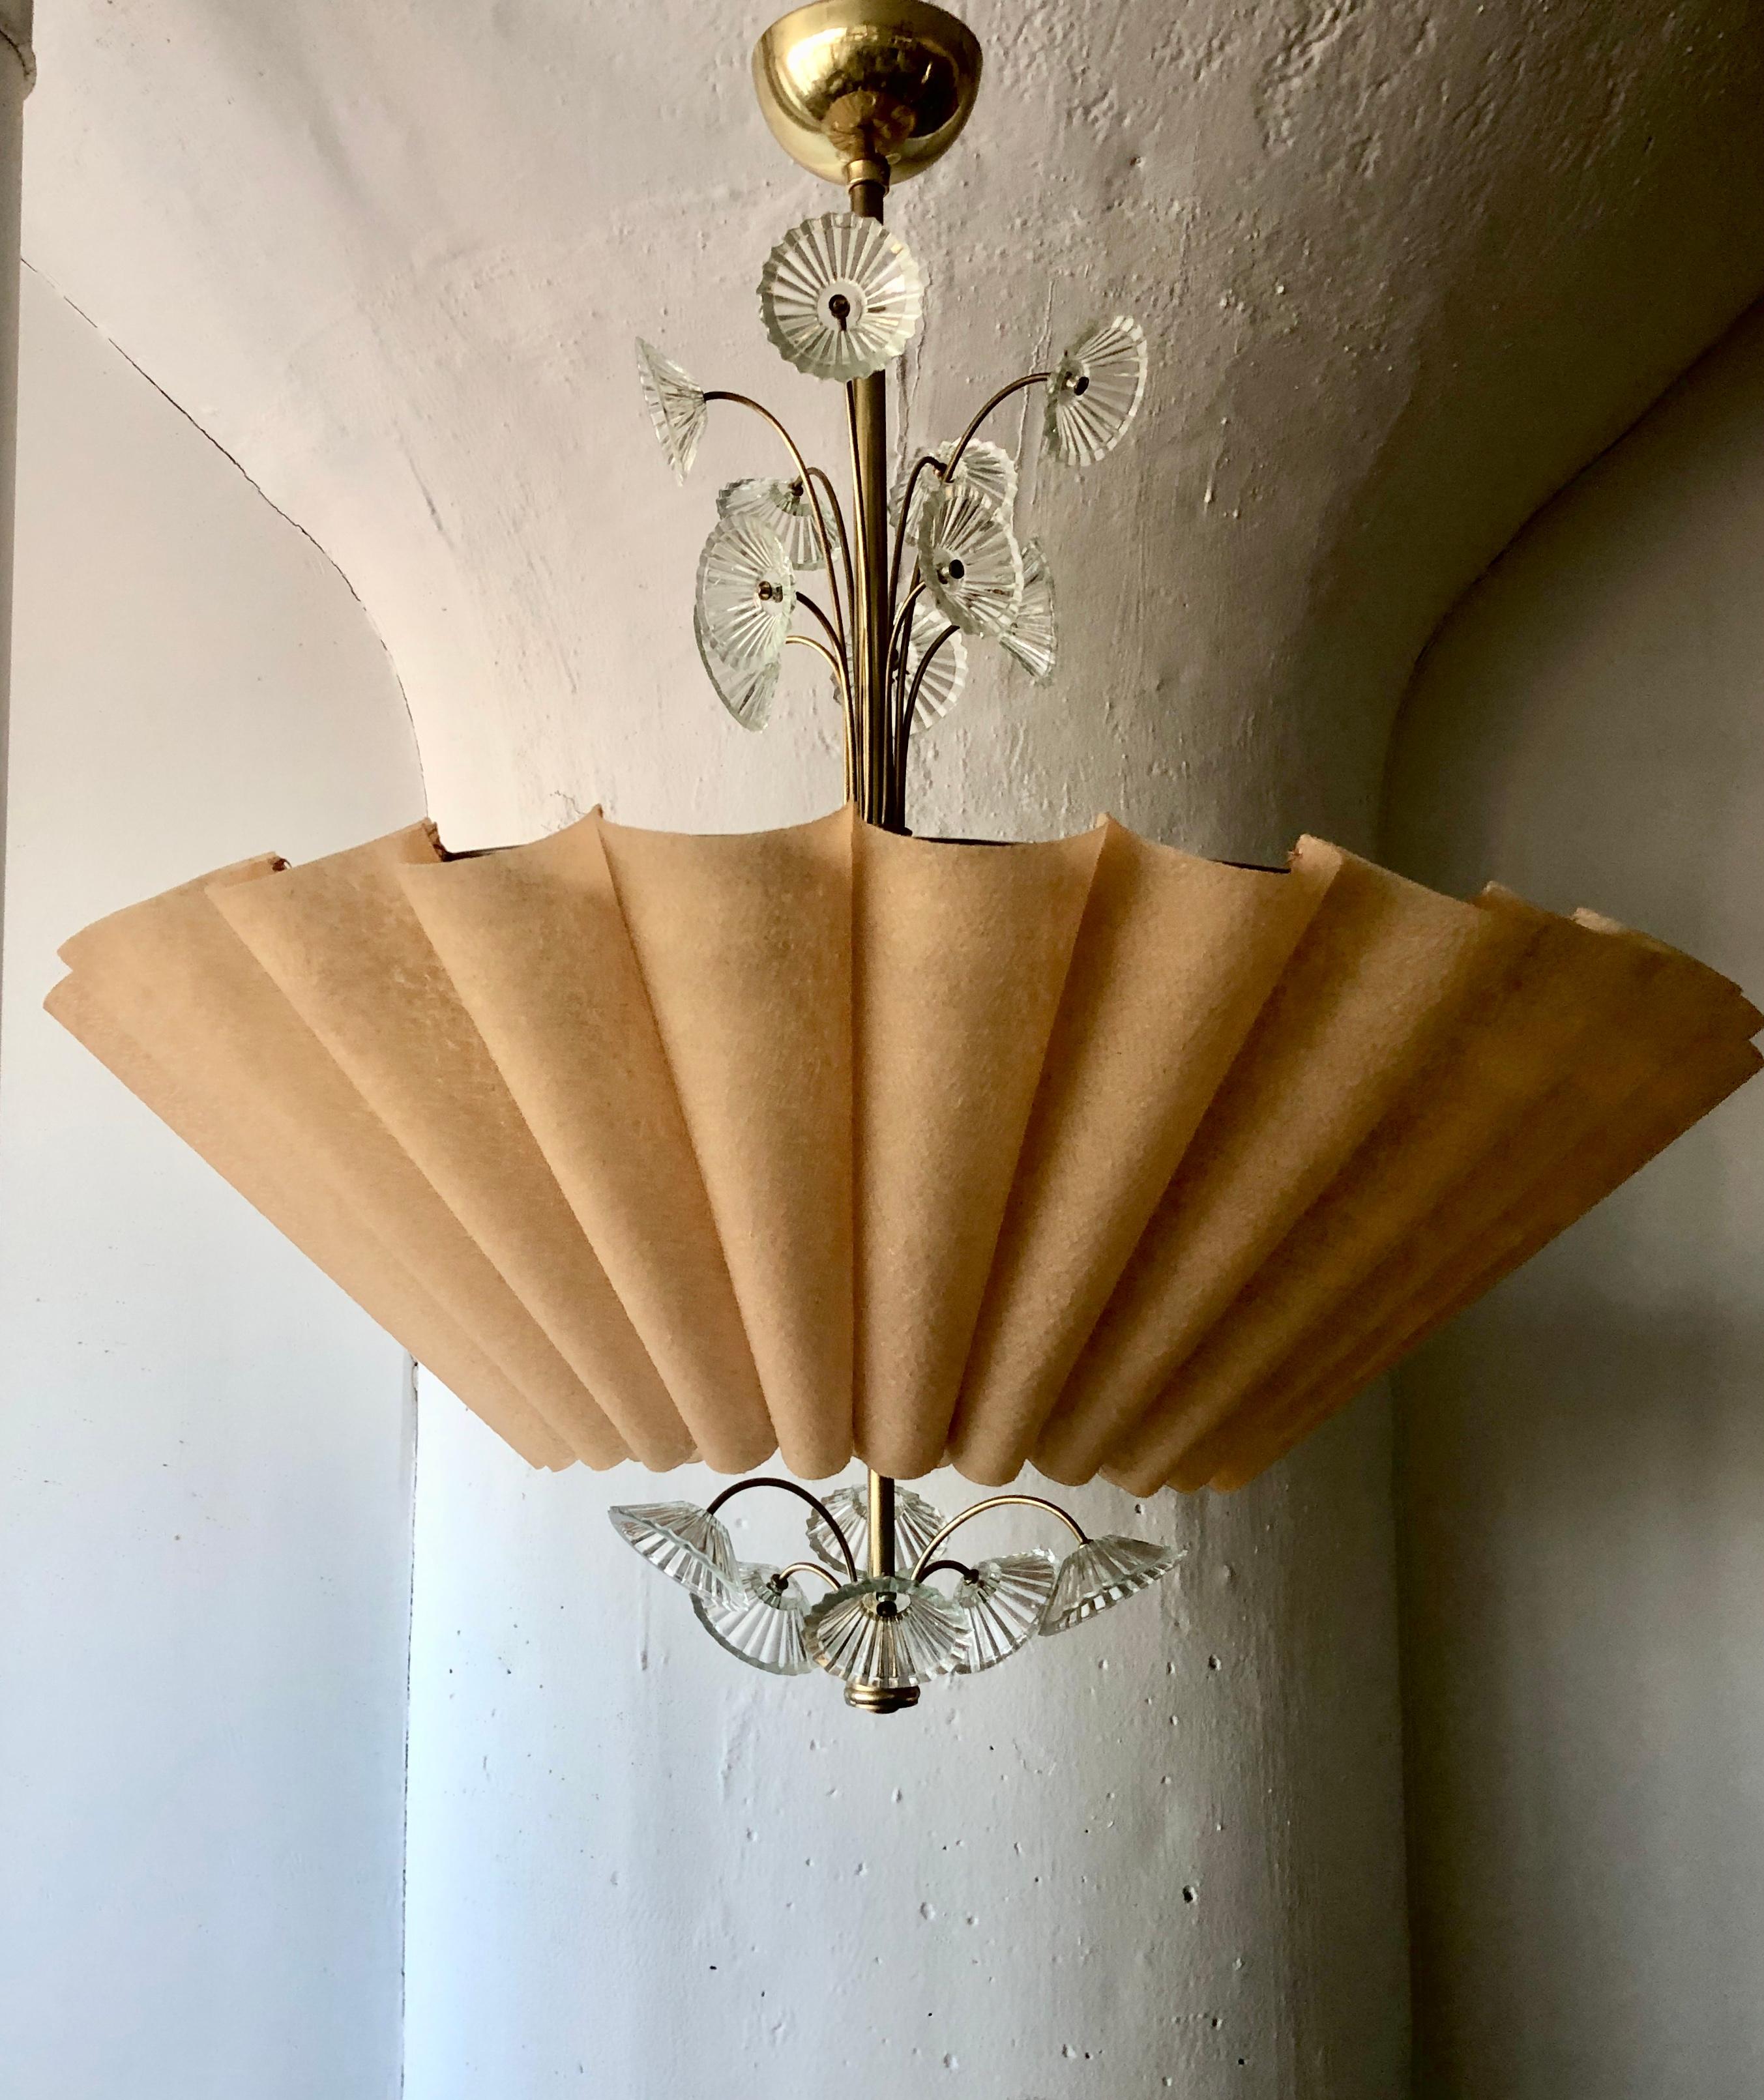 A Chandelier designed by Lisa Johansson-Pape for Orno, Finland . Circa 1950th. The glass flowers decorations on the stem and a pleated, faux parchment shade. (3) Edison style sockets.
Rewiring as per customer specification available upon request.